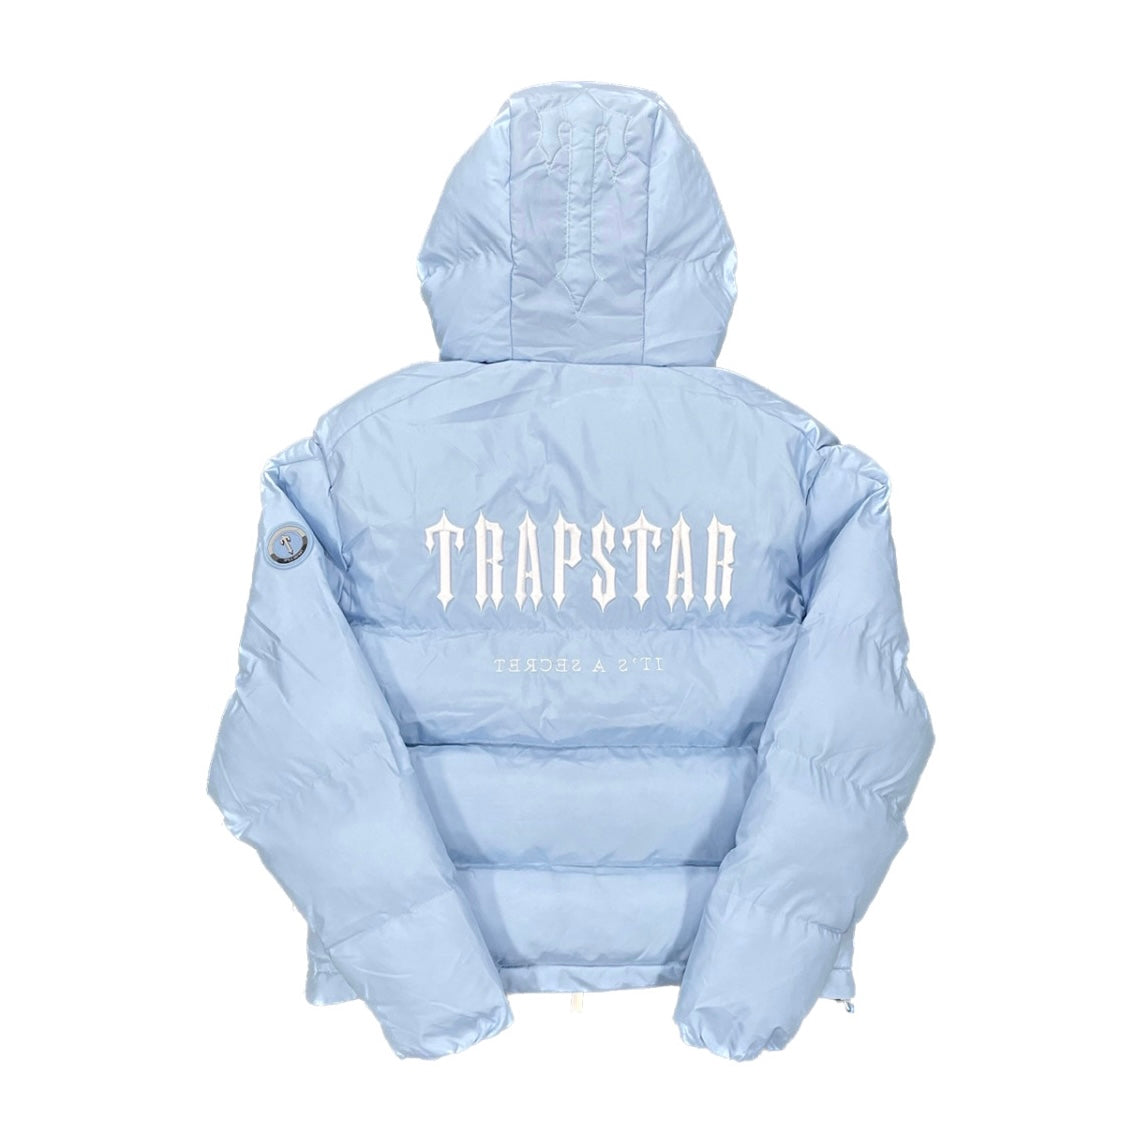 TRAPSTAR HOODED PUFFER 2.0 JACKET - ICE BLUE